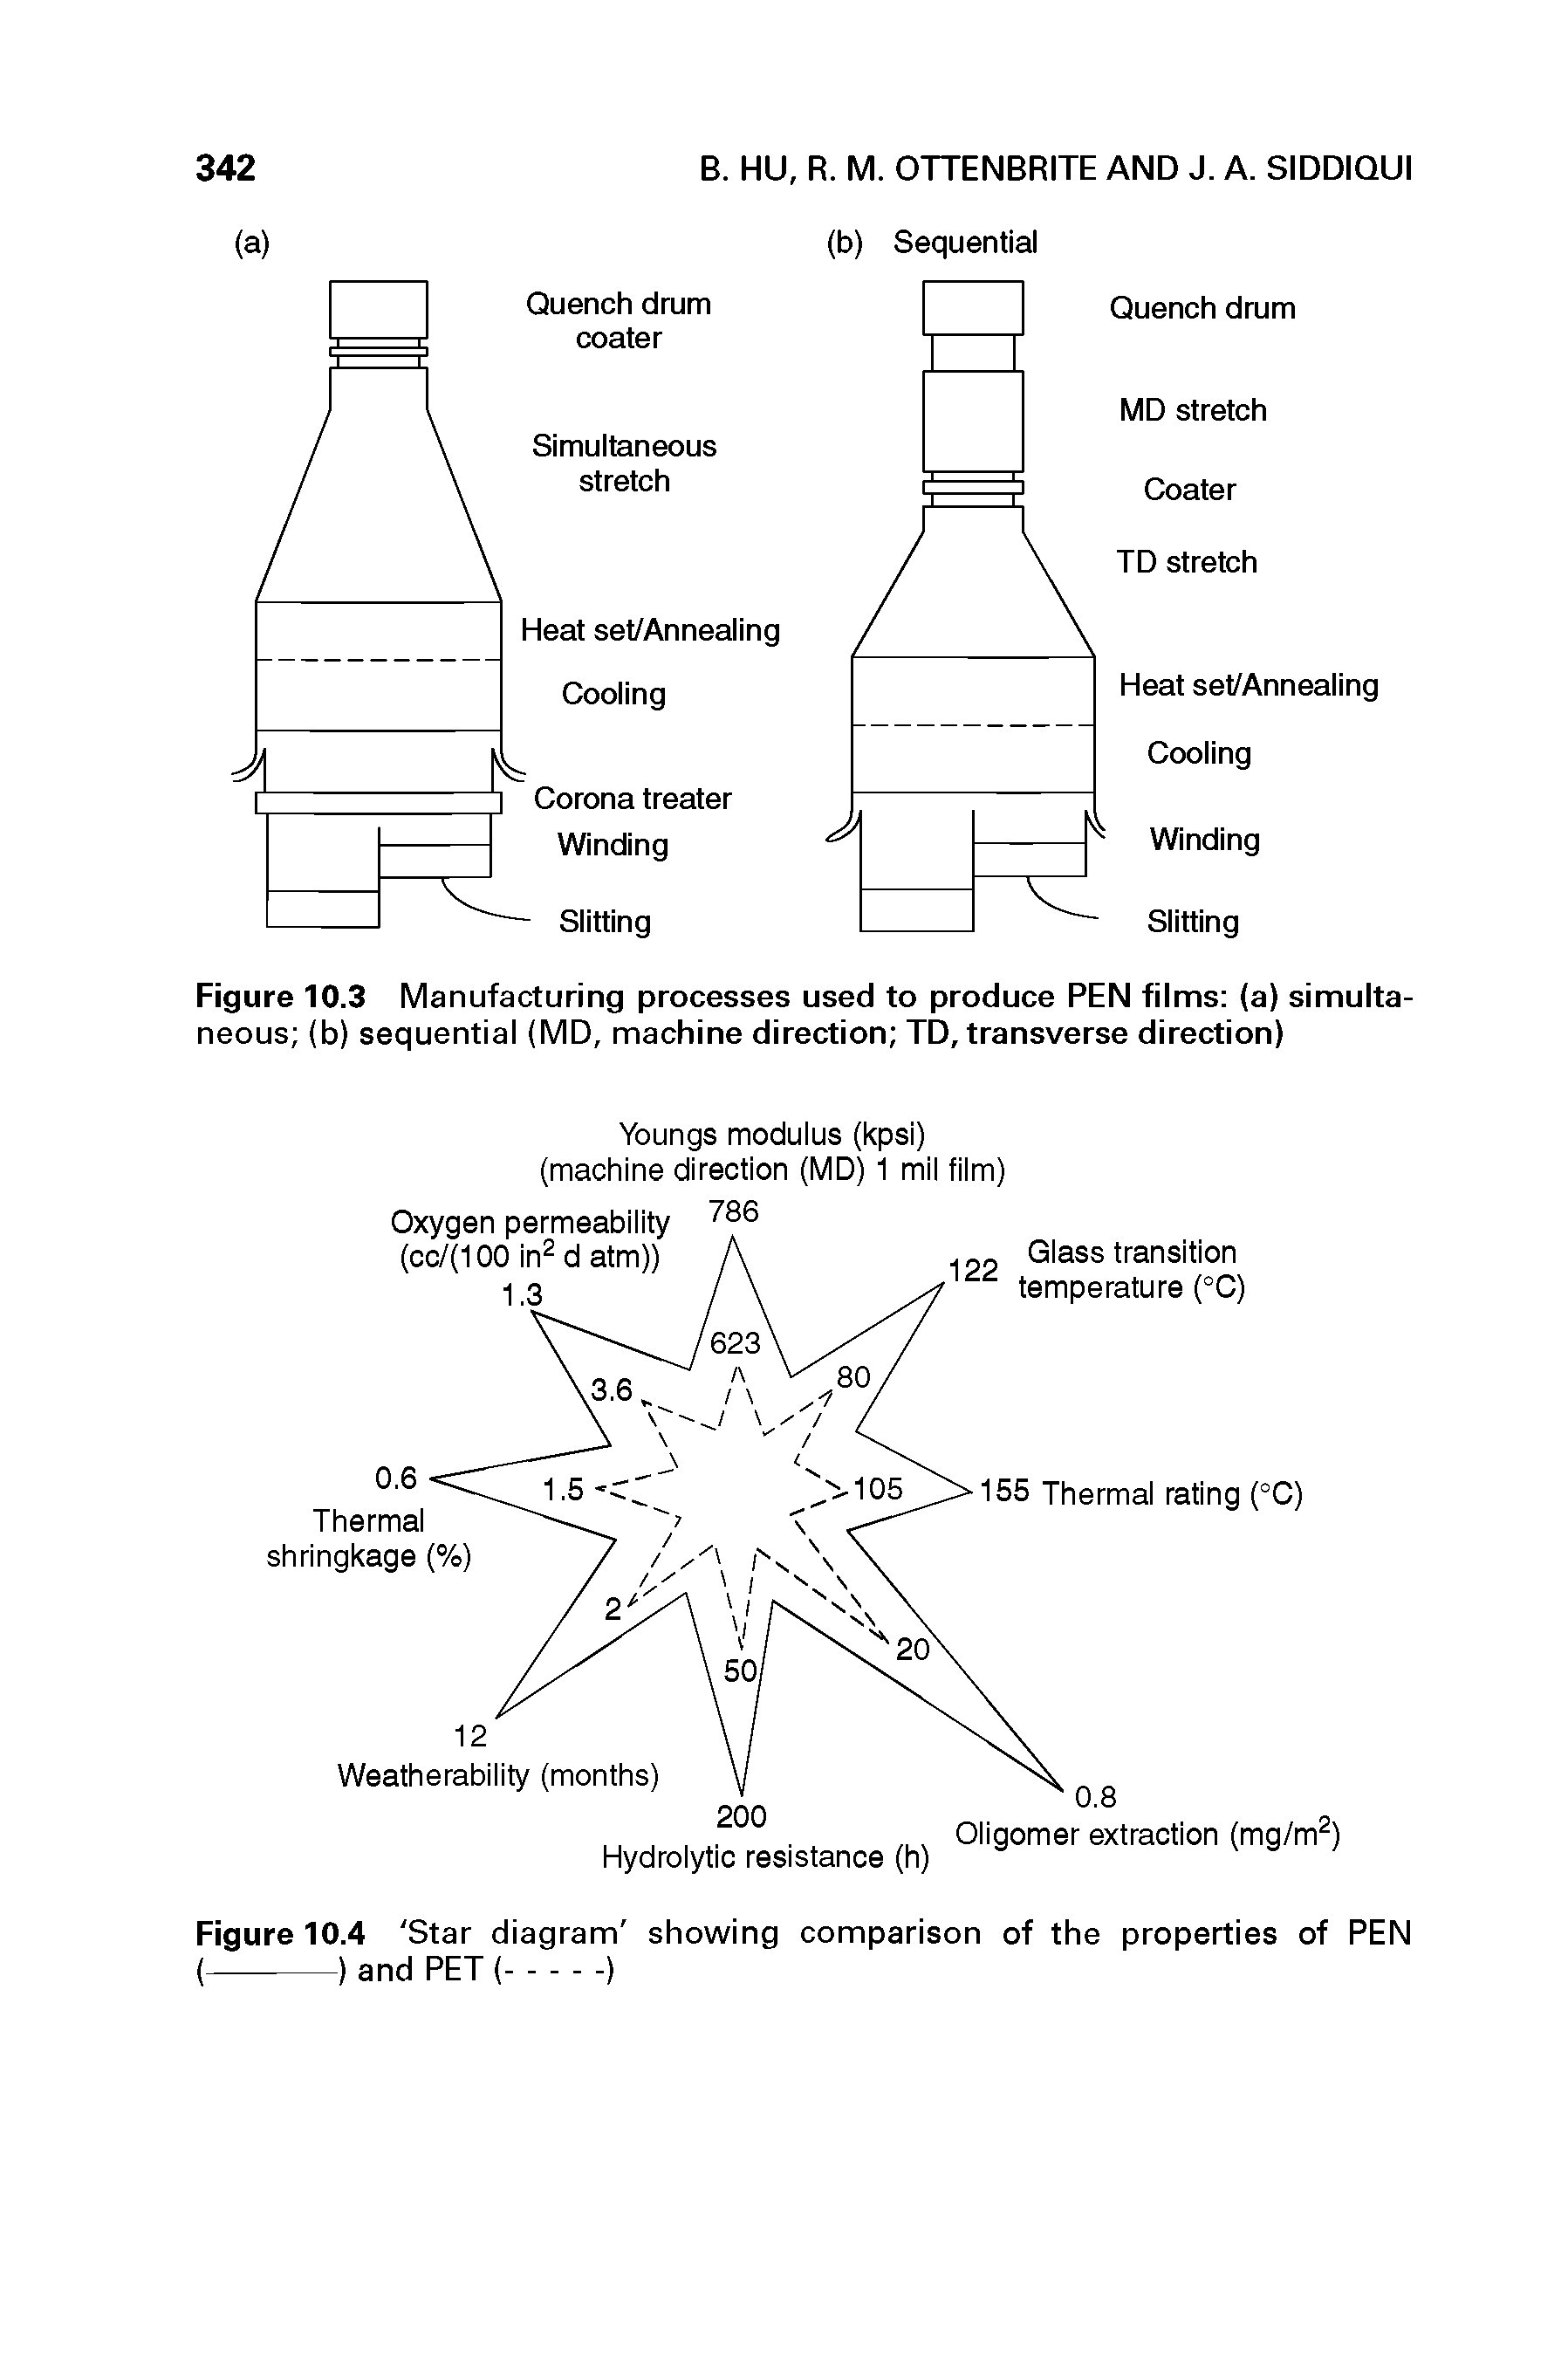 Figure 10.4 Star diagram showing comparison of the properties of PEN (-------) and PET (.)...